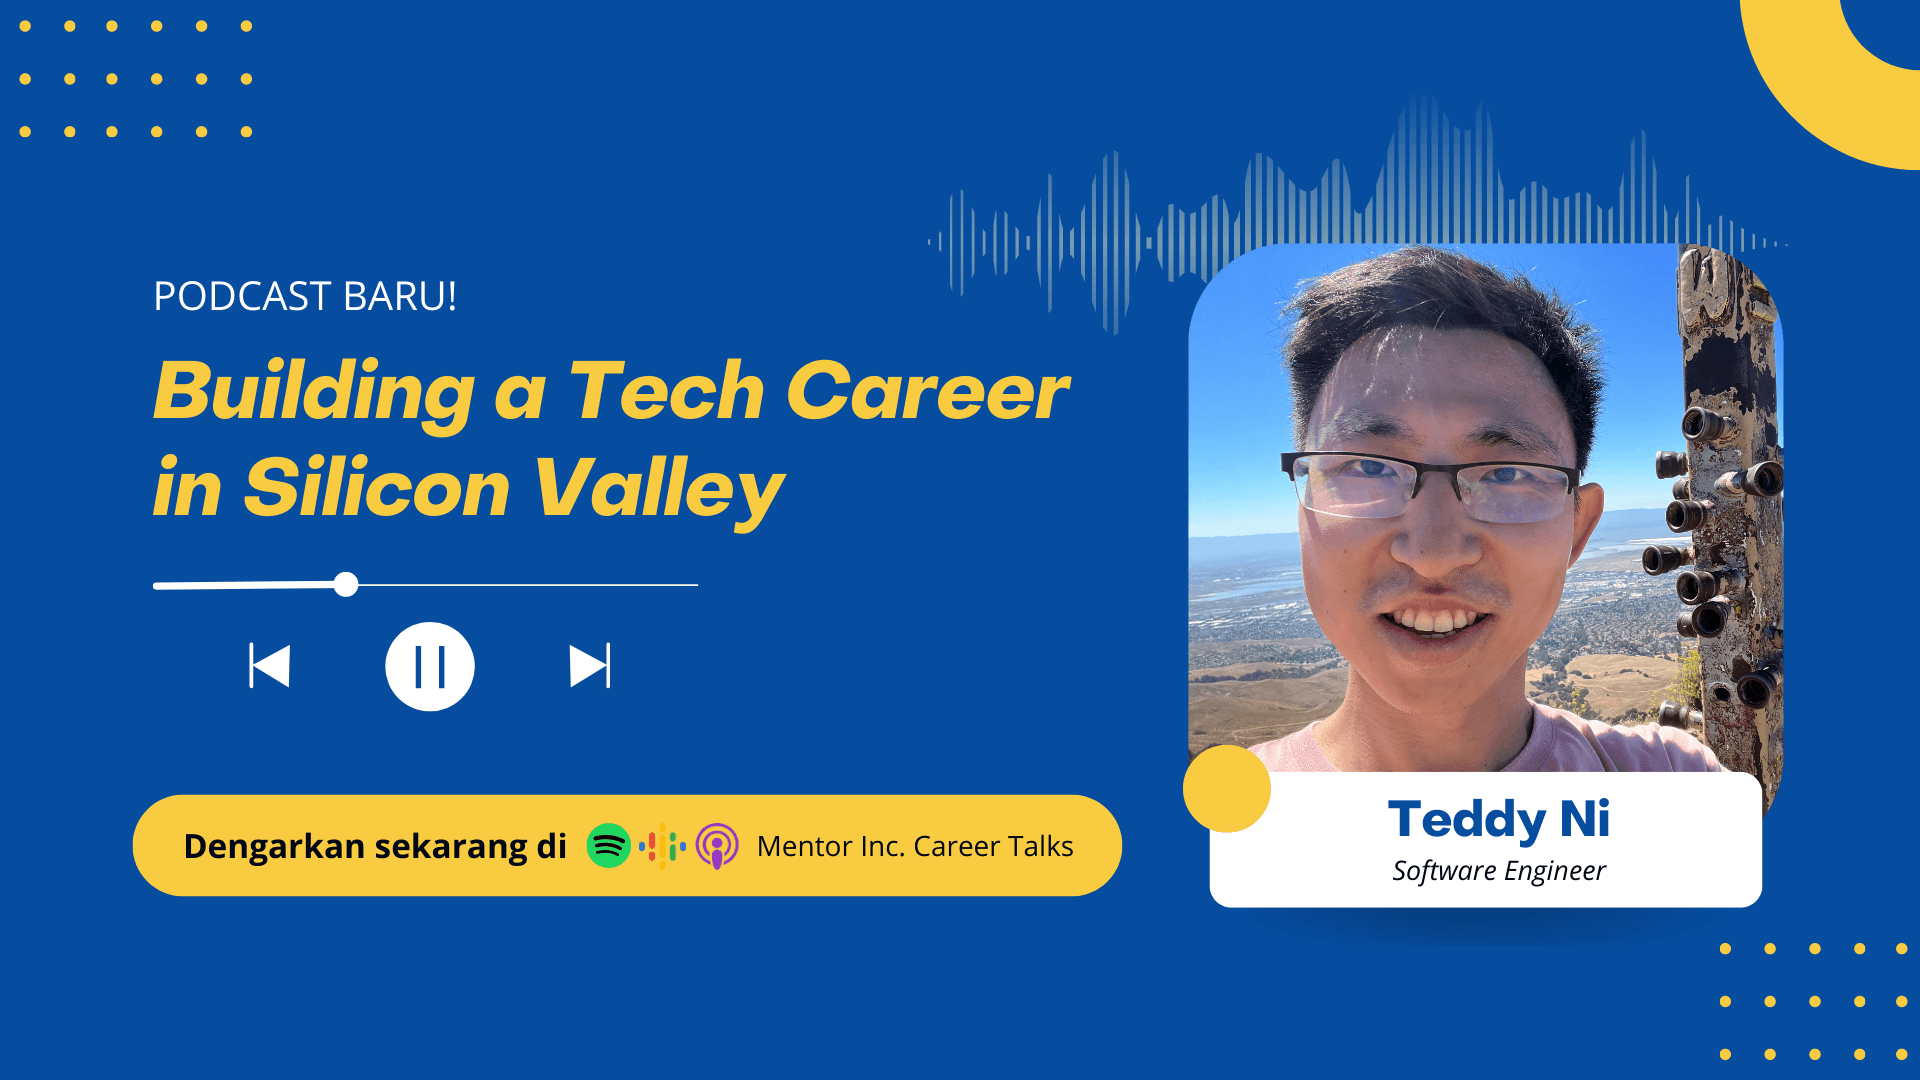 Teddy Ni on building a tech career in Silicon Valley. What is it like working in big tech jobs? How can one get there and what skills do you need to progress?